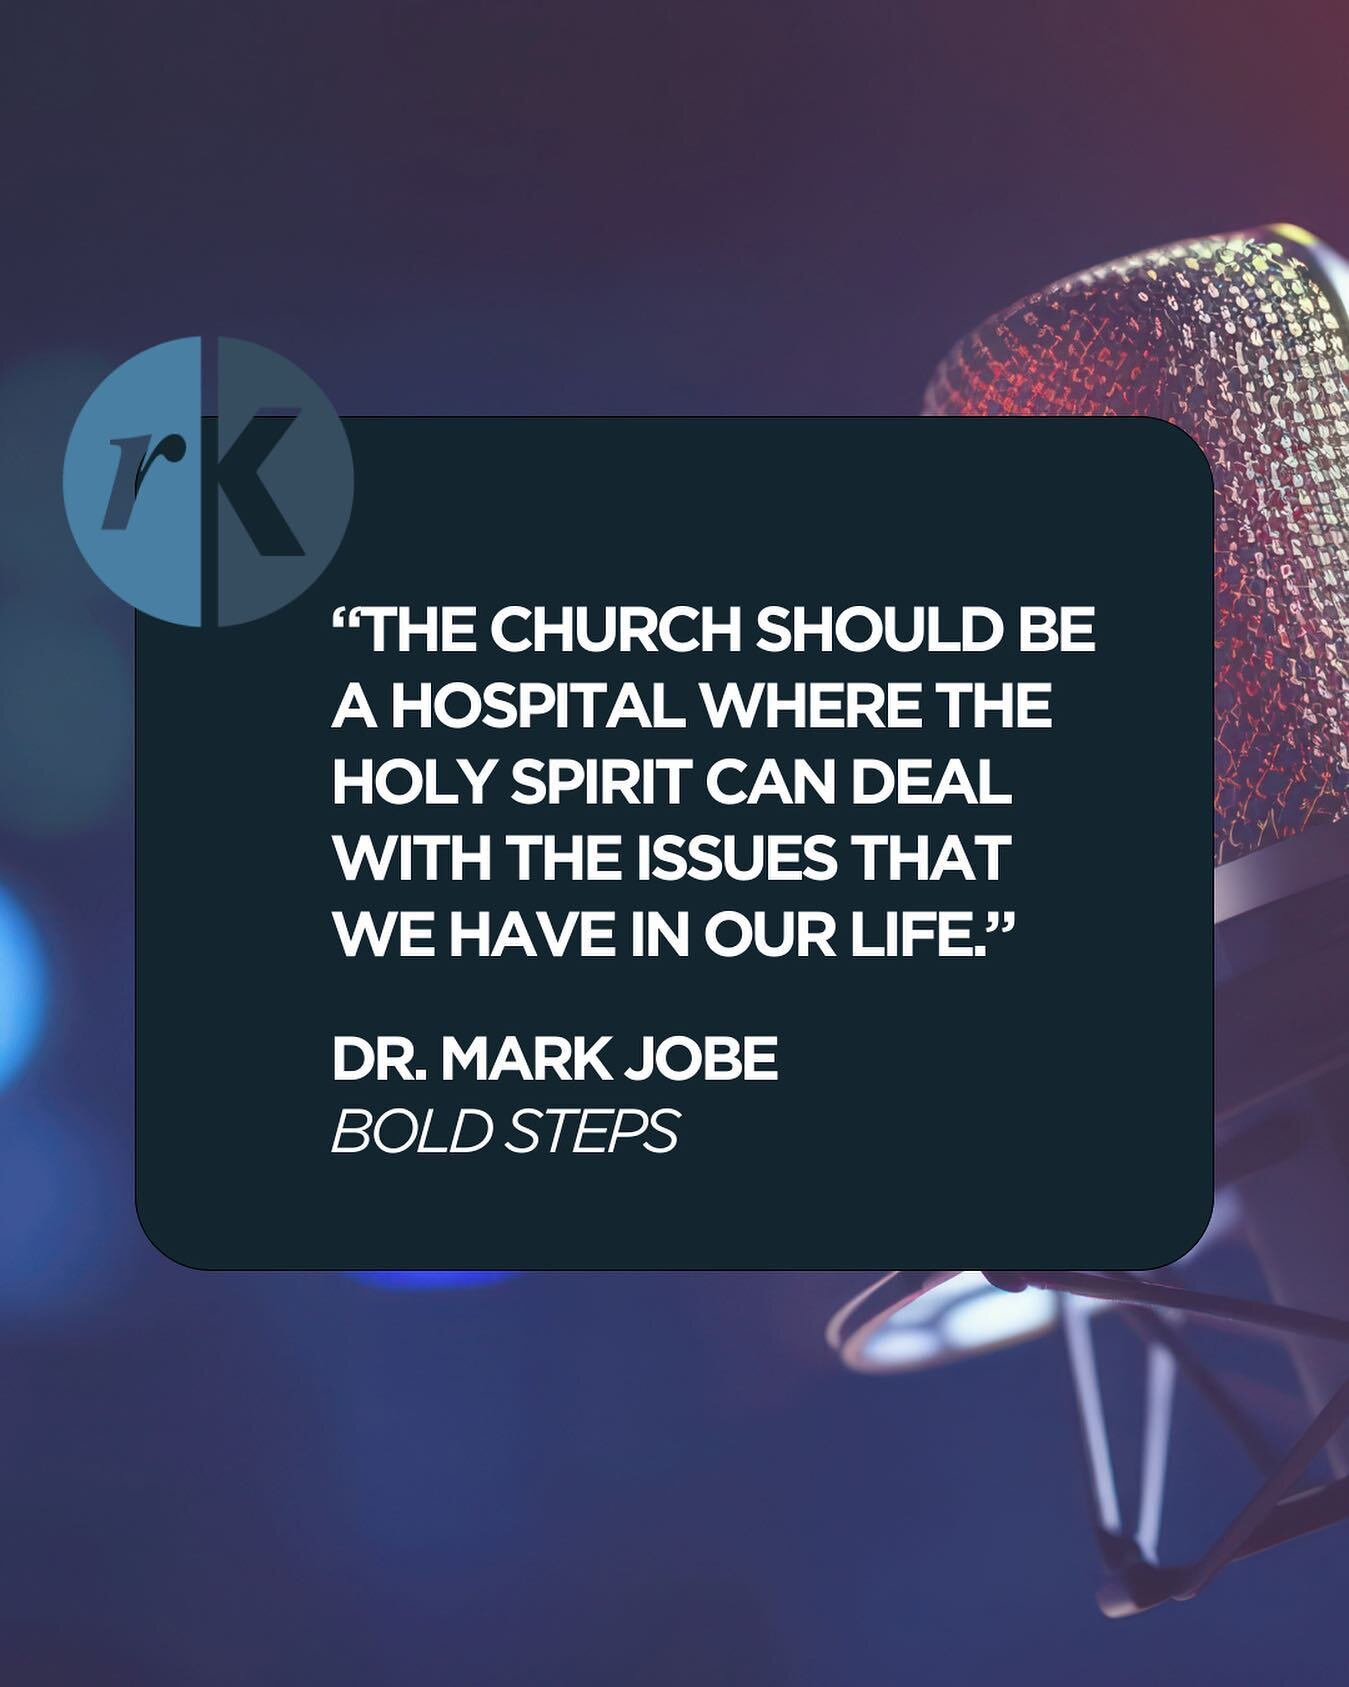 Today&rsquo;s quote of the day is from Dr. Mark Jobe of @boldstepsradio. #rkmedia